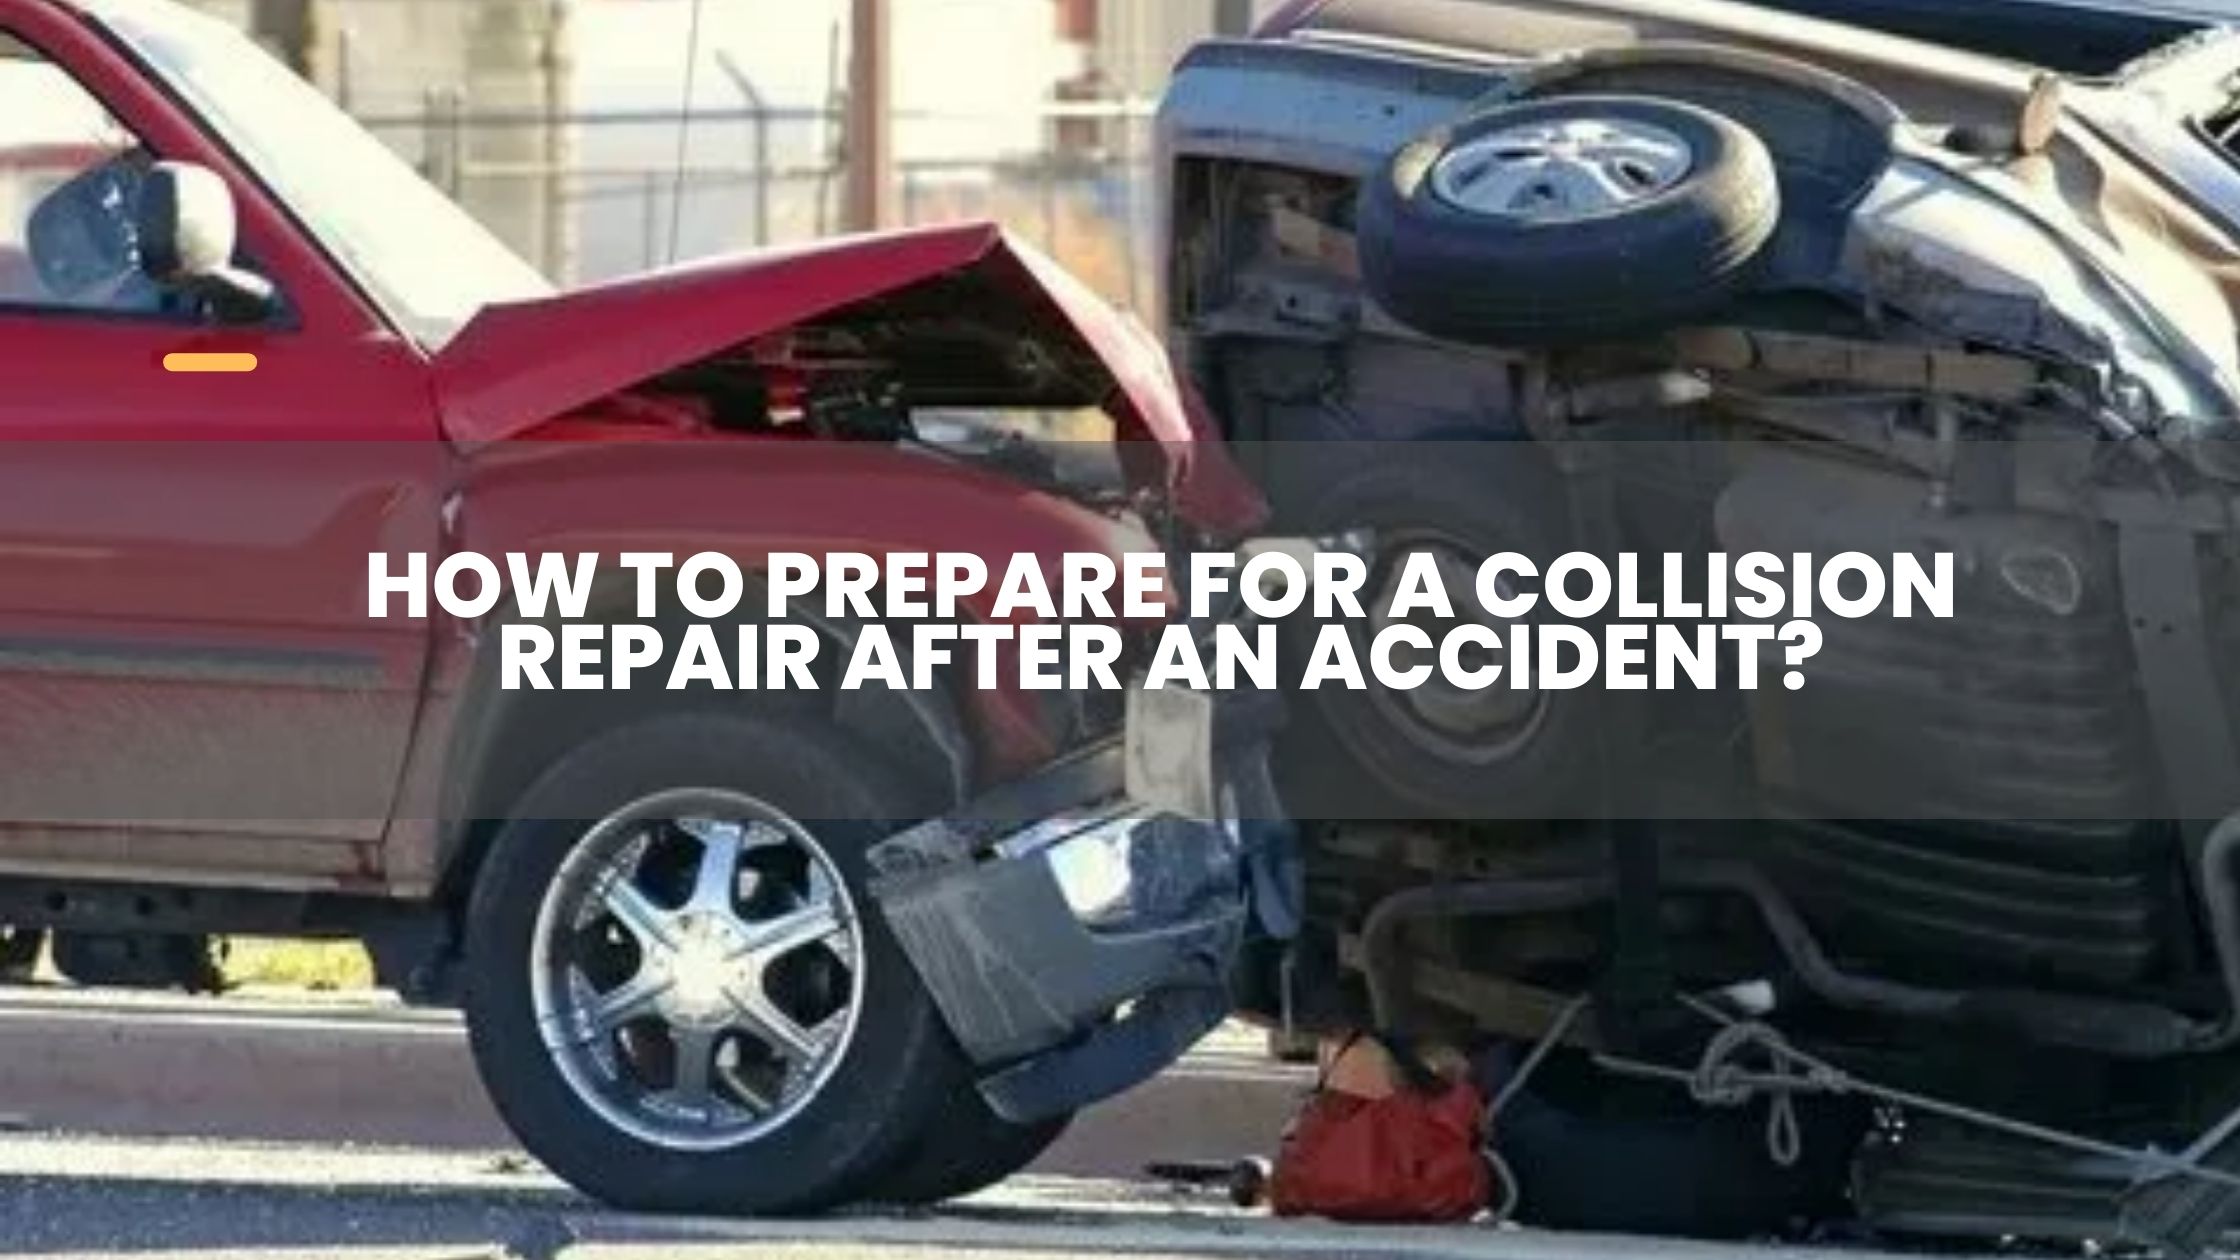 How to Prepare for a Collision Repair After an Accident